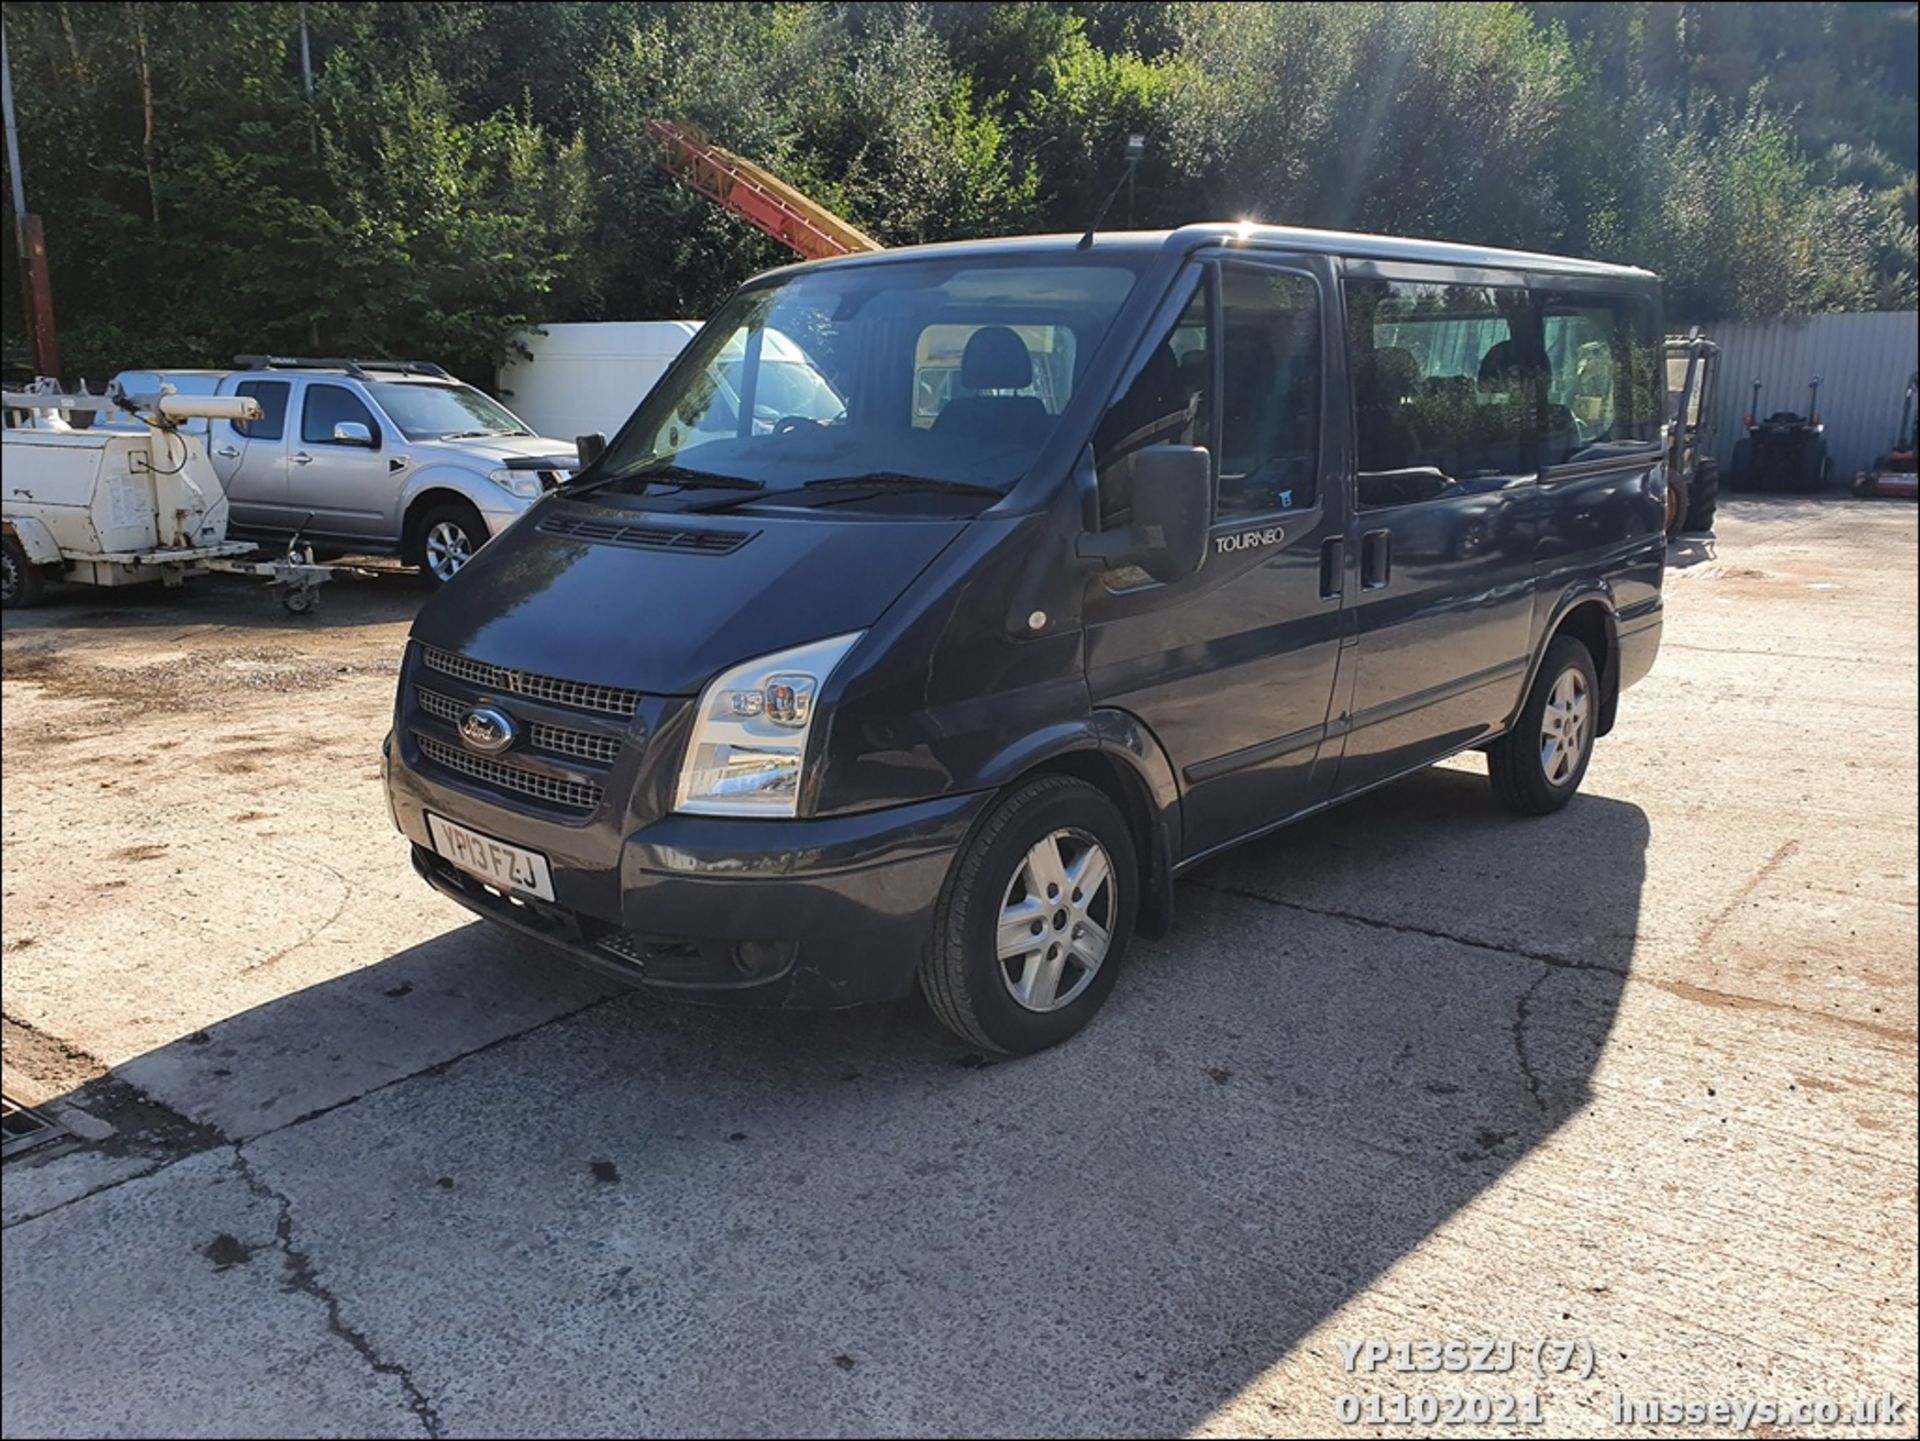 13/13 FORD TRANSIT 125 T280 FWD - 2198cc 5dr MPV (Grey) - Image 18 of 18